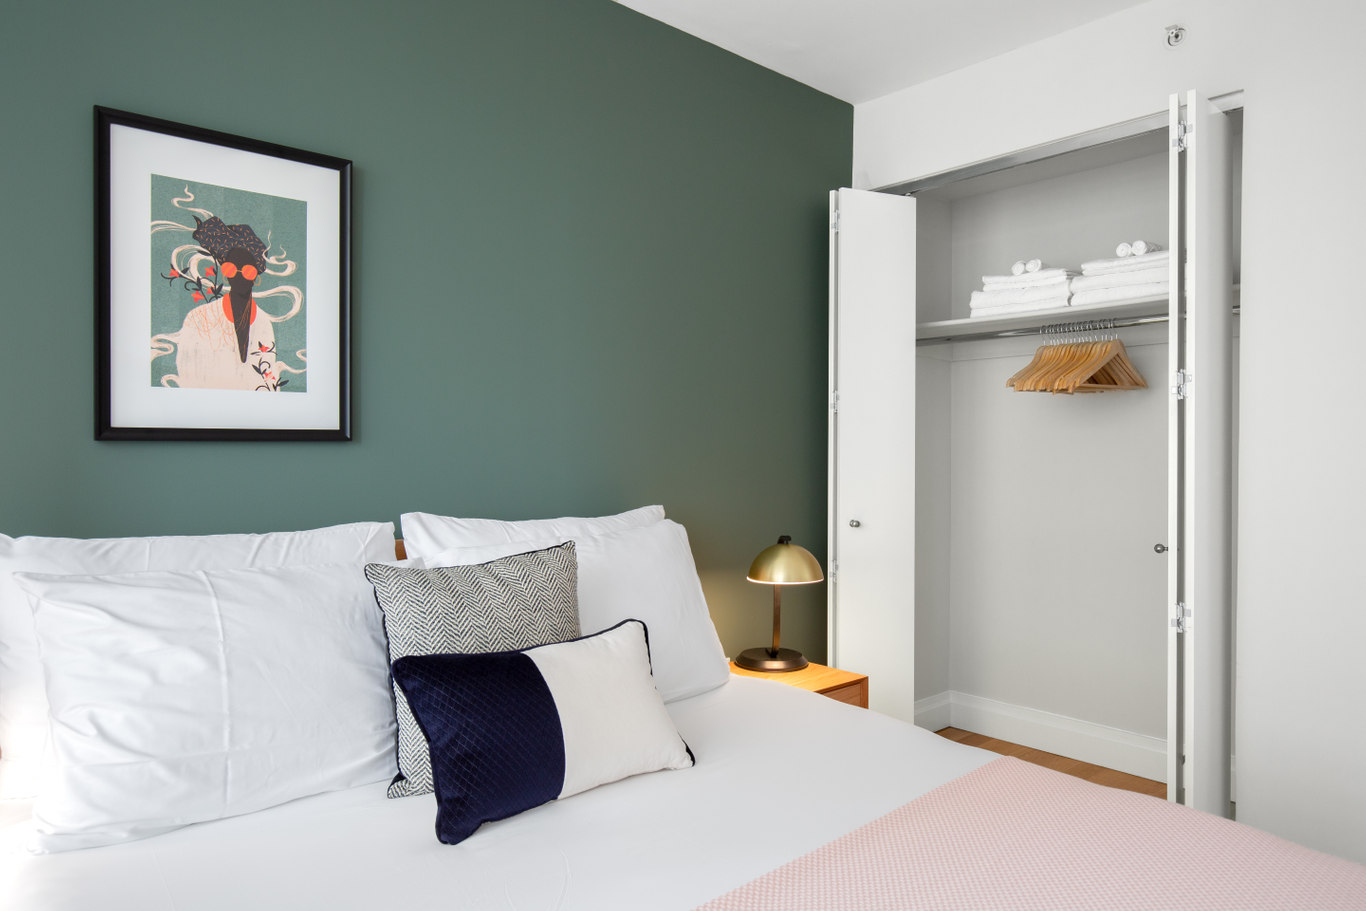 A small bedroom with a green wall with a painting in a black frame above a large bed with white linens. On the right side there is an open closet with wooden hangers and white towels